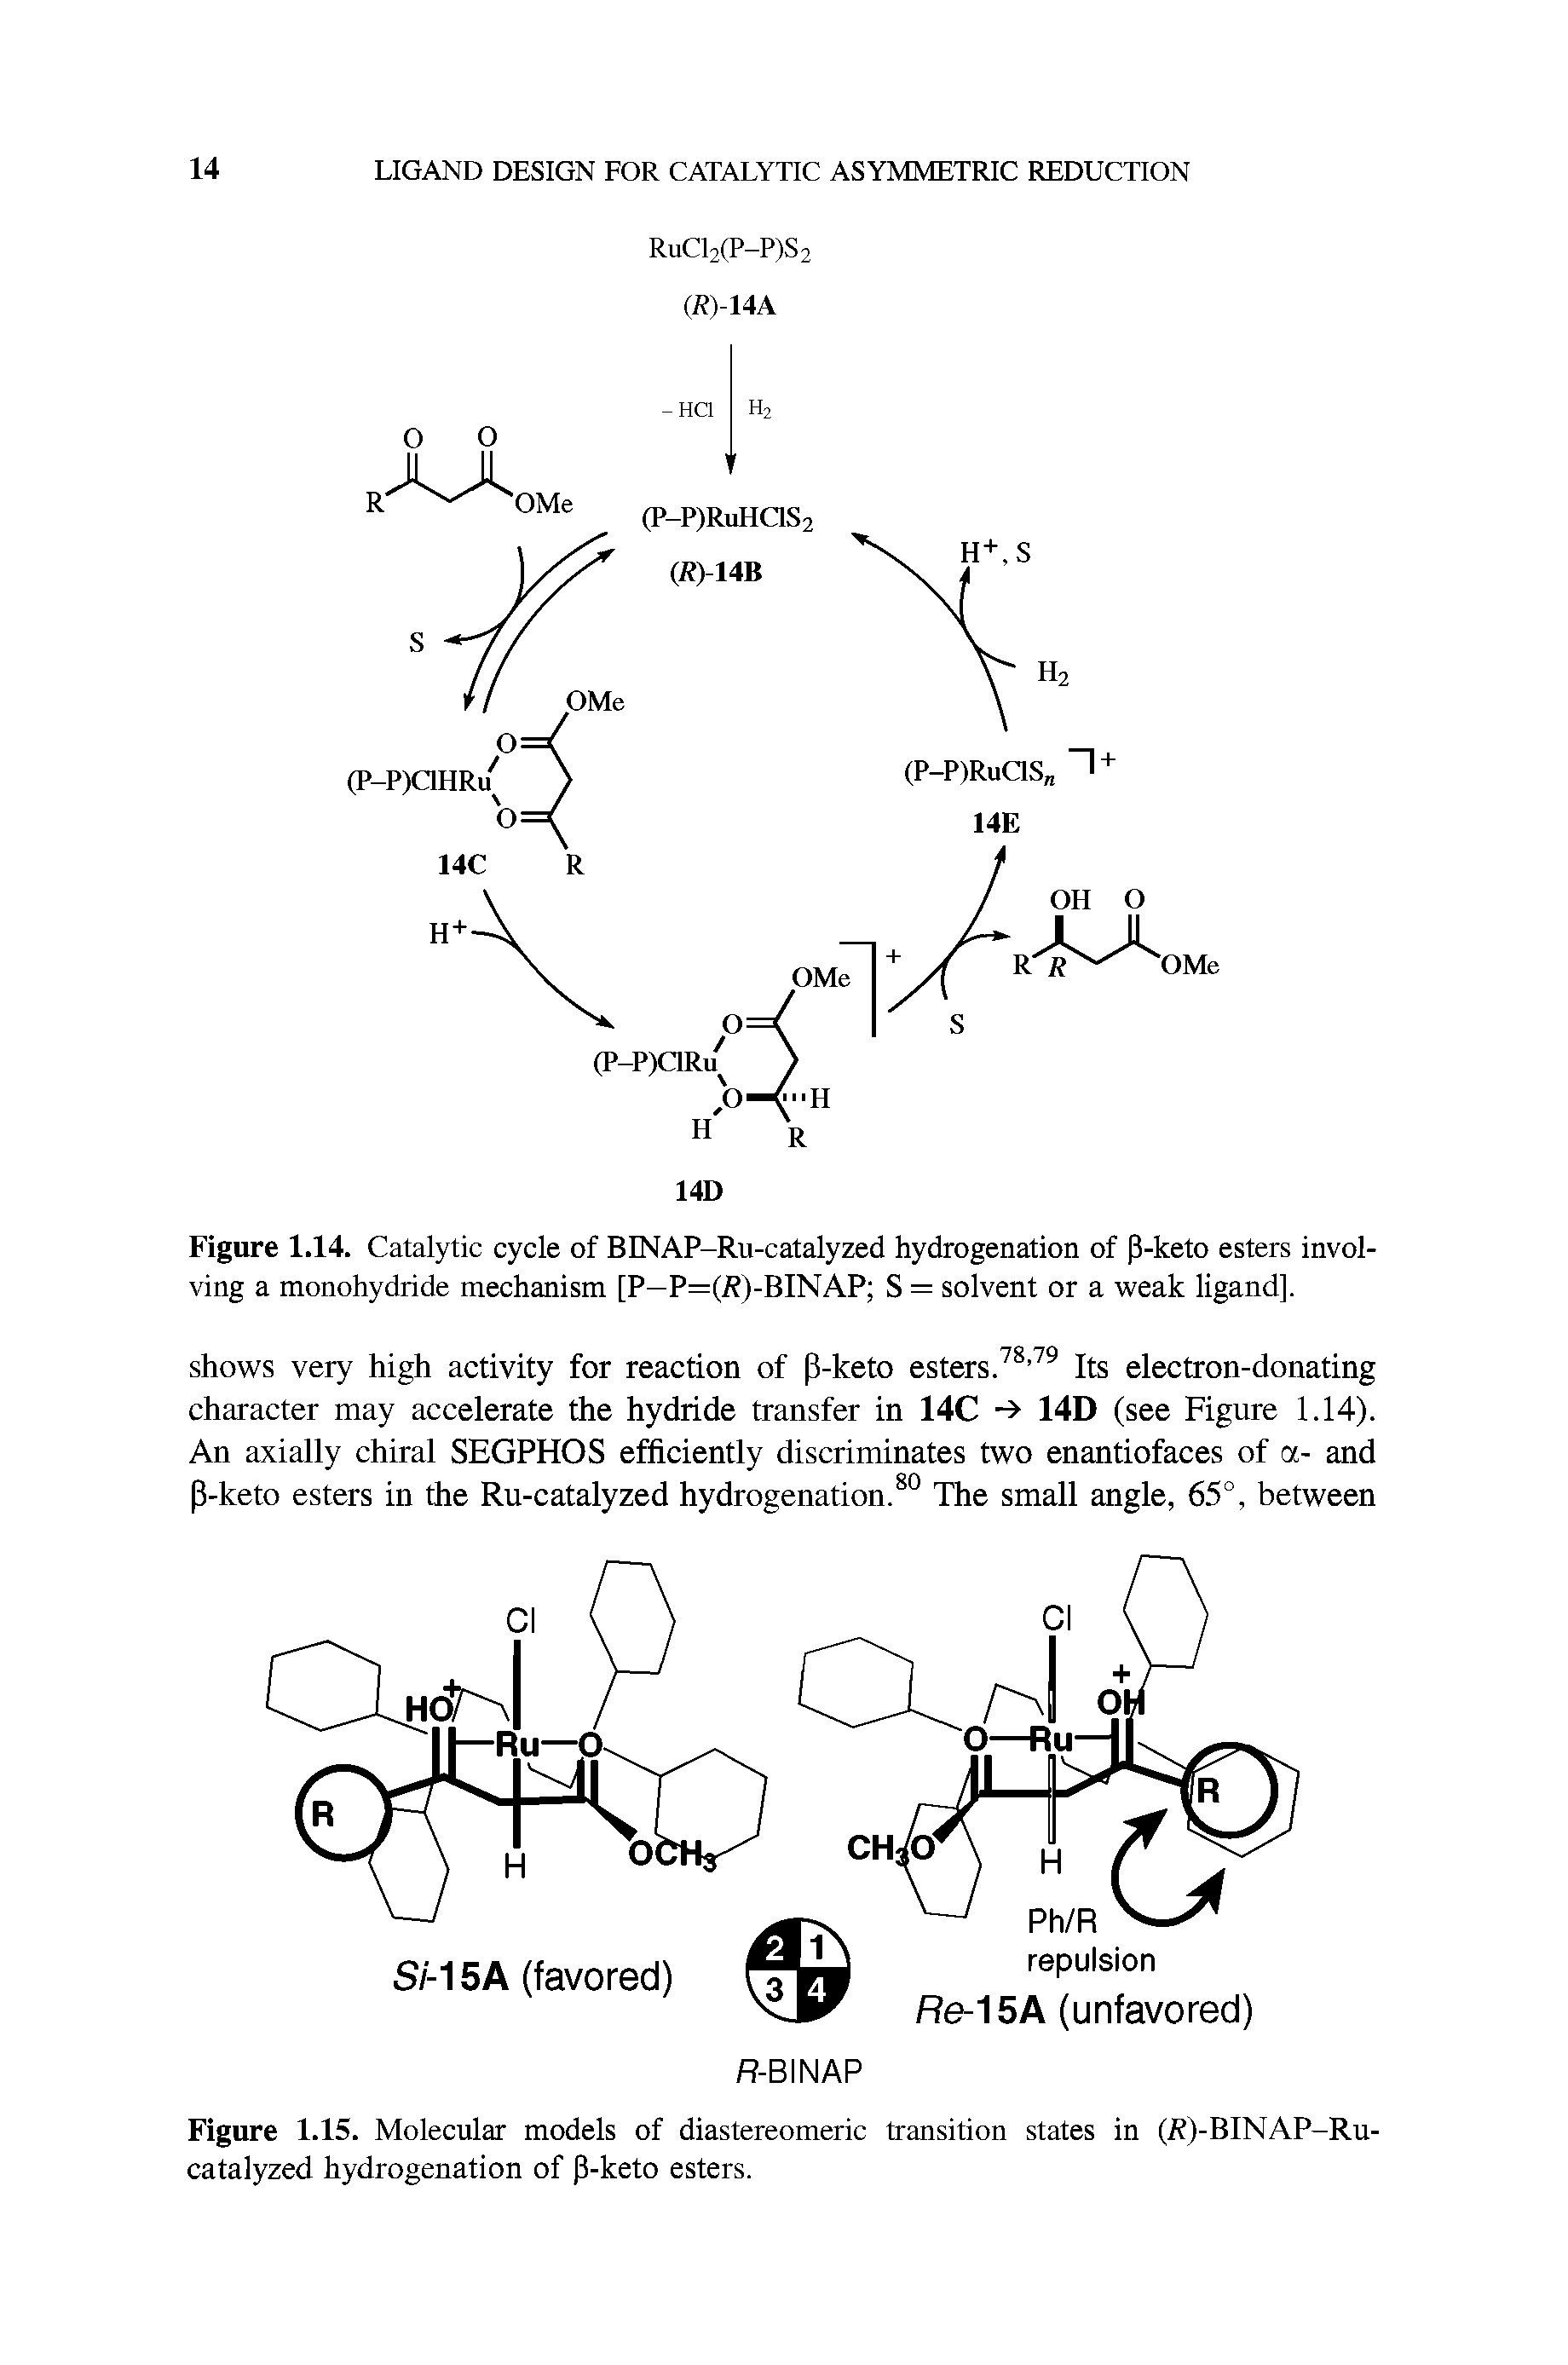 Figure 1.14. Catalytic cycle of BINAP-Ru-catalyzed hydrogenation of P-keto esters involving a monohydride mechanism [P—P=(i )-BINAP S = solvent or a weak ligand].